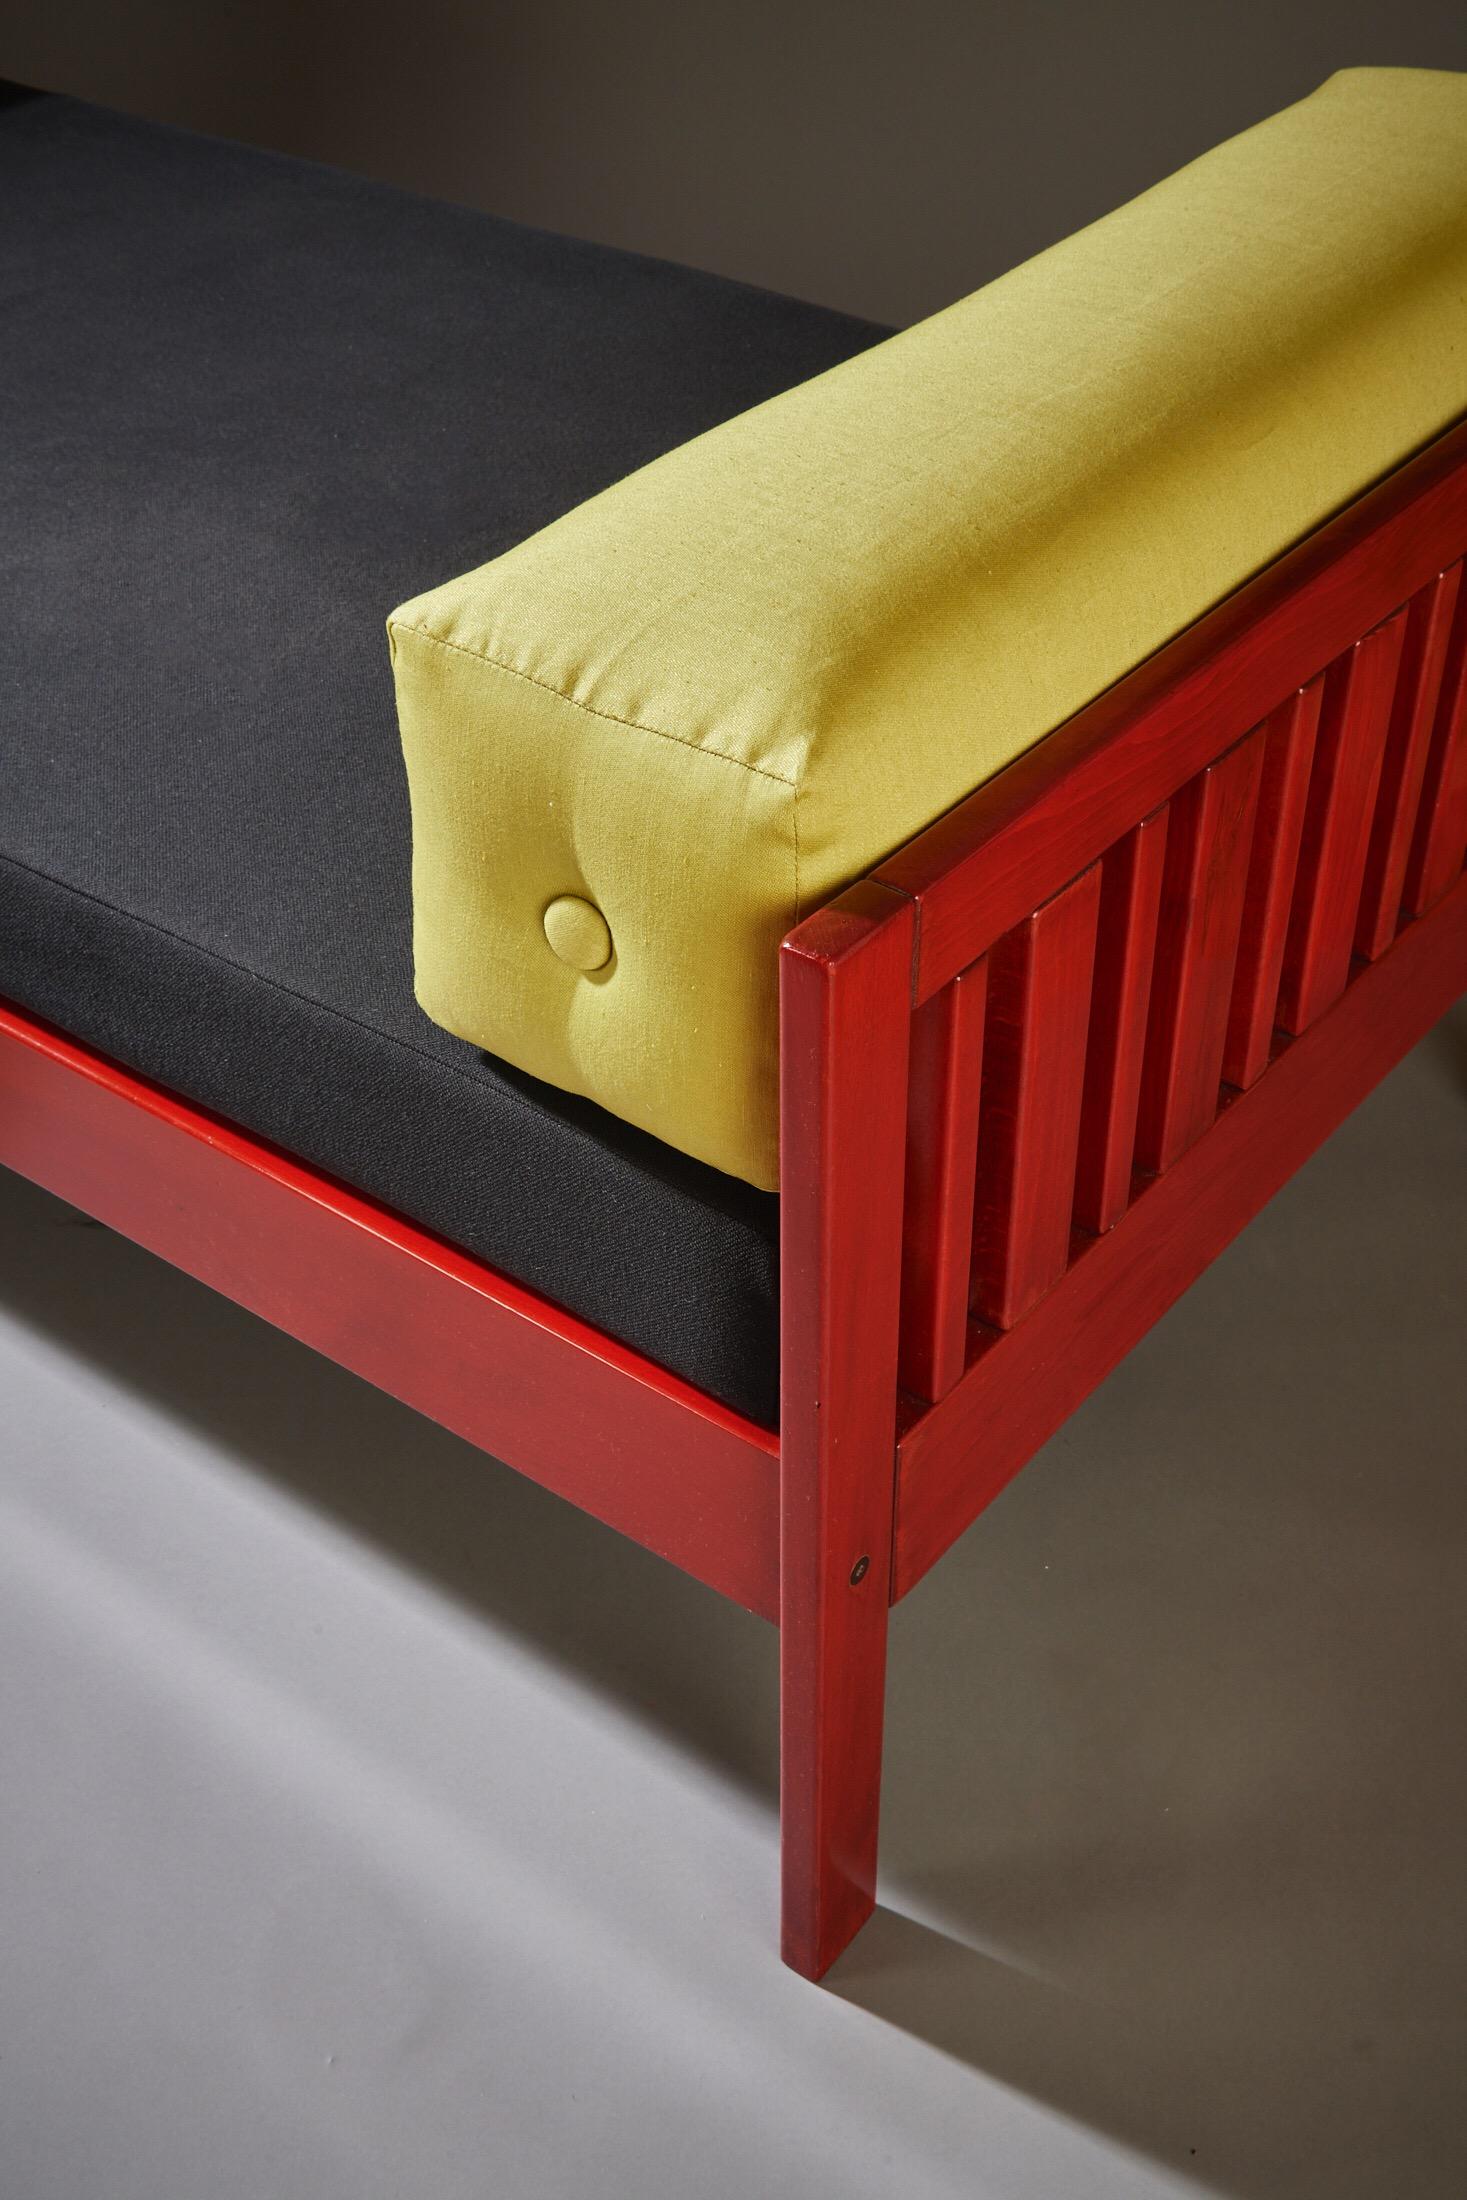 Ettore Sottsass Daybed, Red Lacquered Wood, Chartreuse Upholstery, Italy c. 1962 For Sale 6